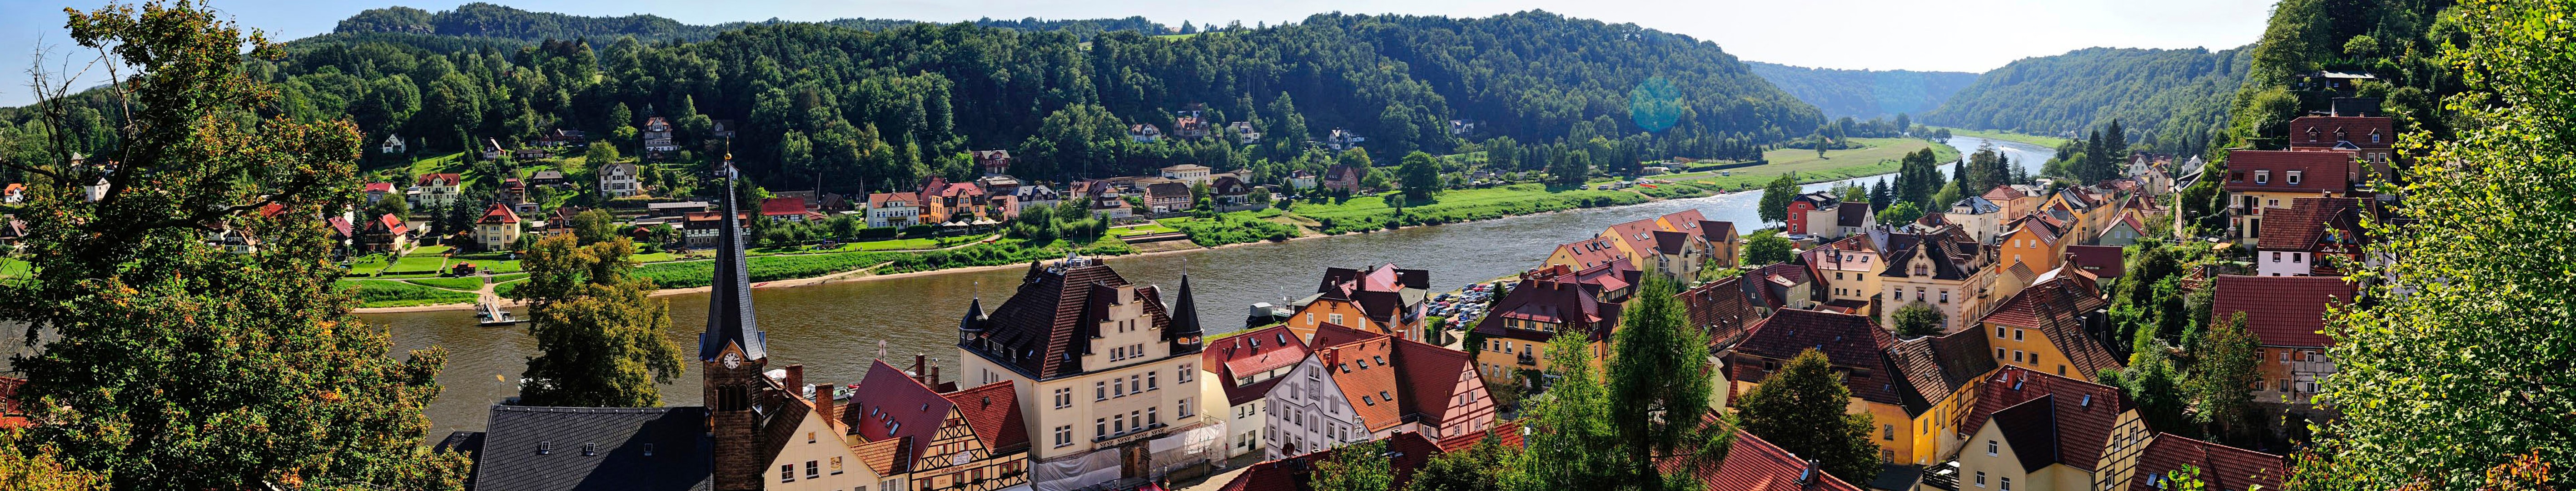 Germany, Europe, River, Town, Hills, Mountains, Water, Grass, Trees, Green, Sky, Panorama Wallpaper